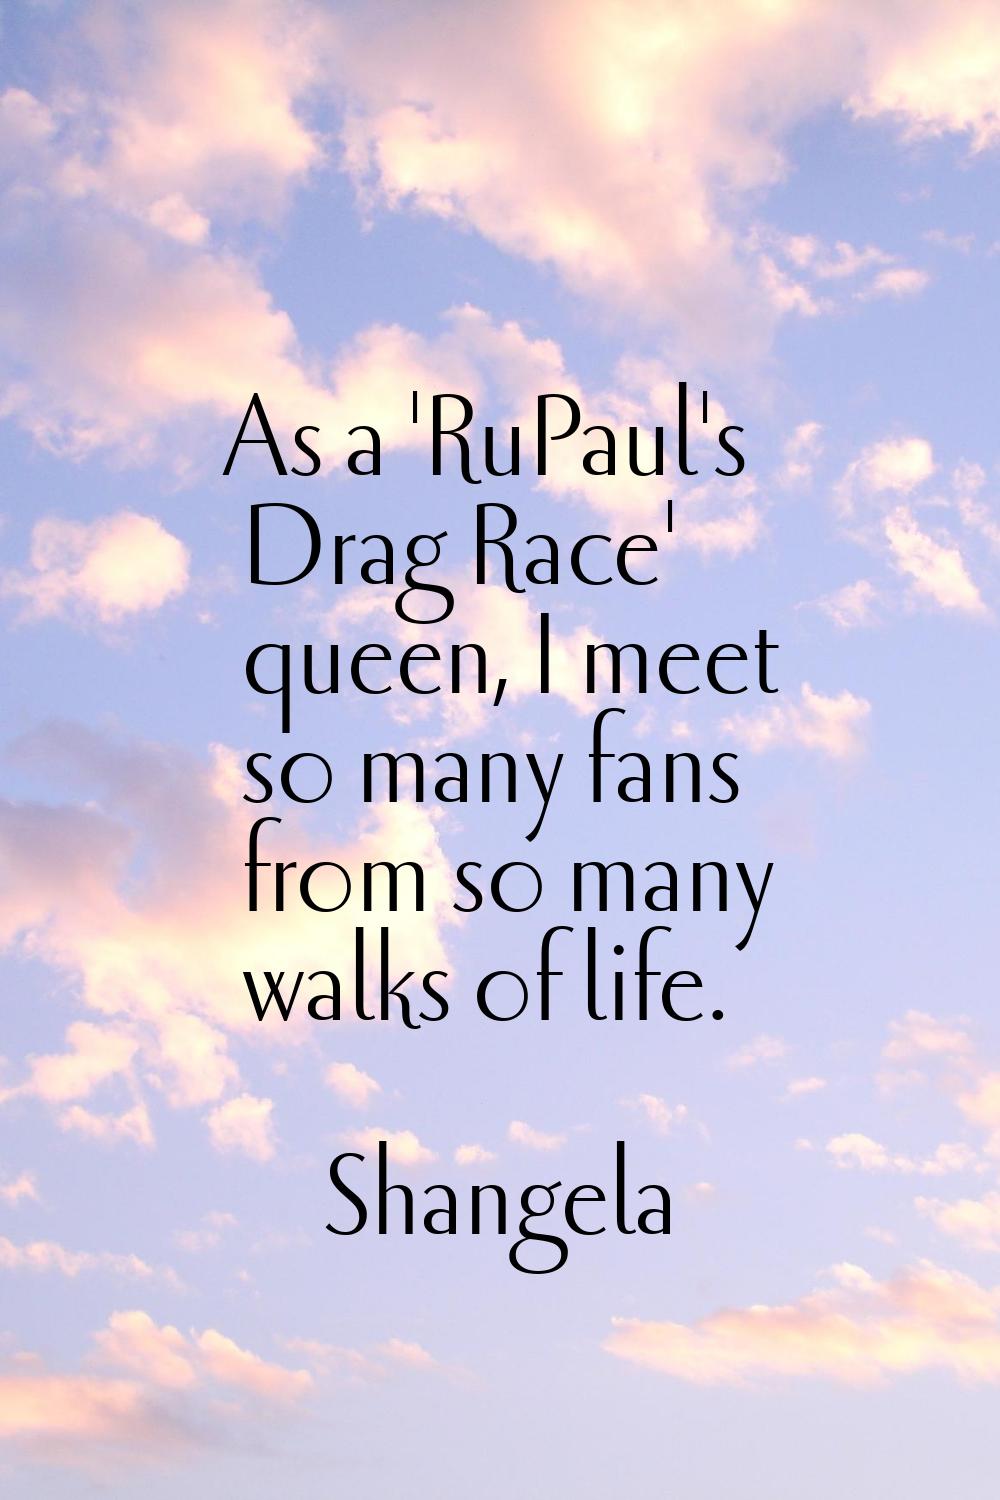 As a 'RuPaul's Drag Race' queen, I meet so many fans from so many walks of life.